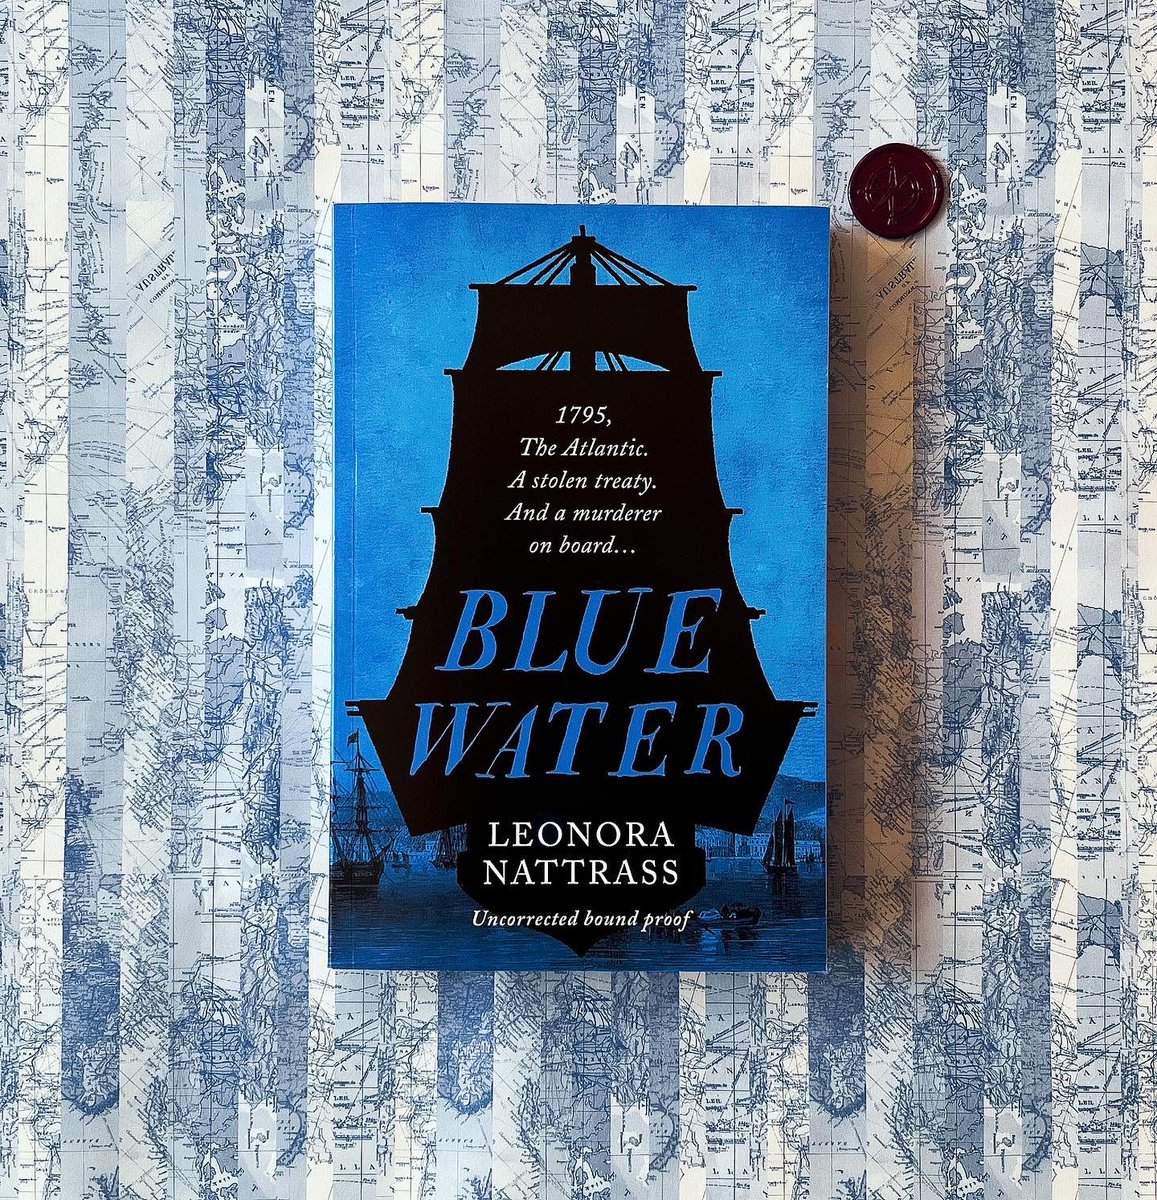 Today is my stop on the blog tour for the excellent 𝑩𝒍𝒖𝒆 𝑾𝒂𝒕𝒆𝒓 by @LeonoraNattrass! My review is live on my blog and #bookstagram now! ⚓️ Huge thanks to @RosieAParnham and @ViperBooks #bluewaterblogtour lifewithallthebooks.com/2022/10/15/blu… instagram.com/p/CjuvZPsLlFN/…